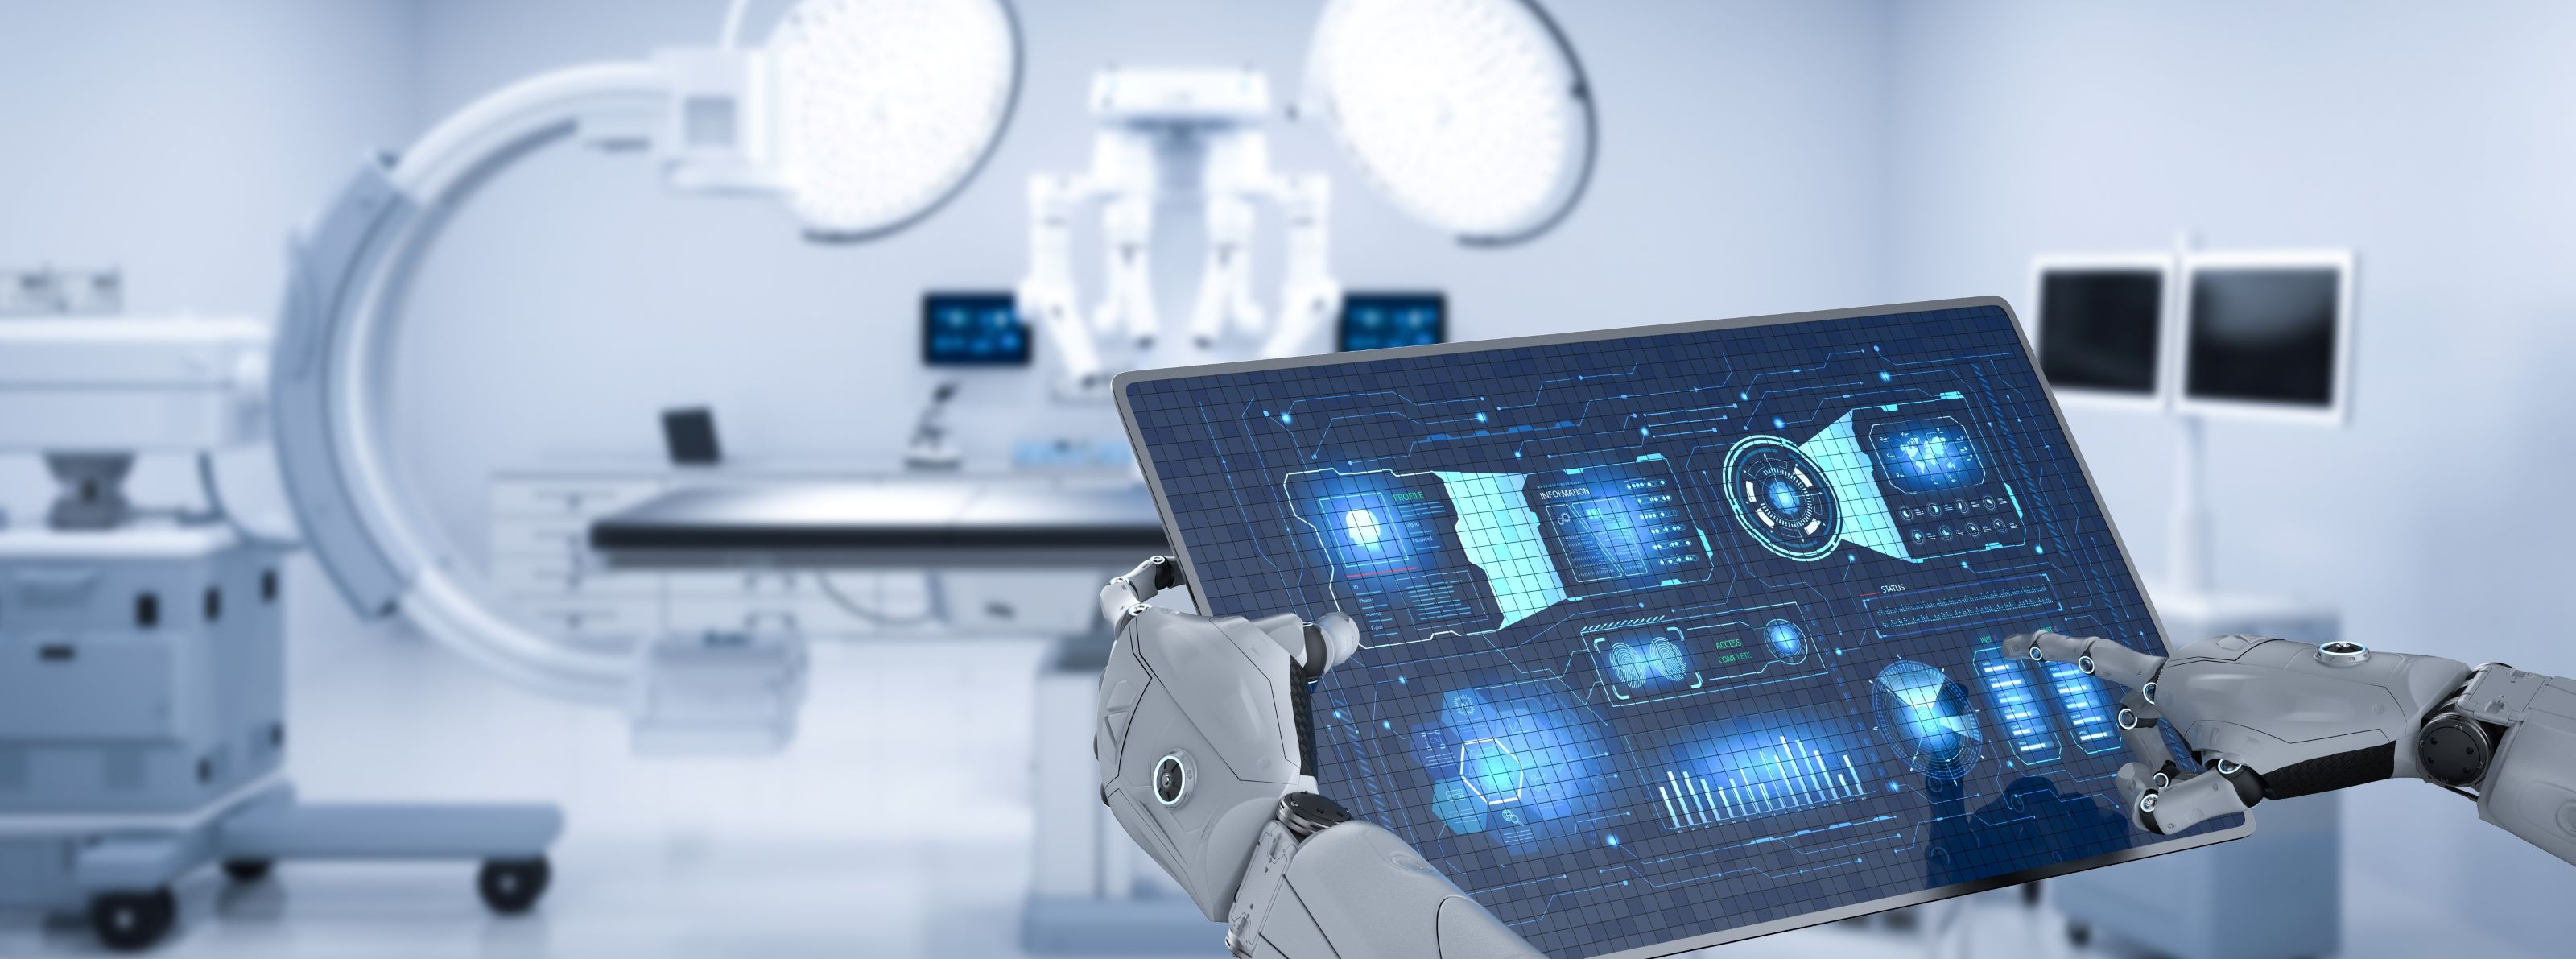 Operating room of the future equipped with advanced technology